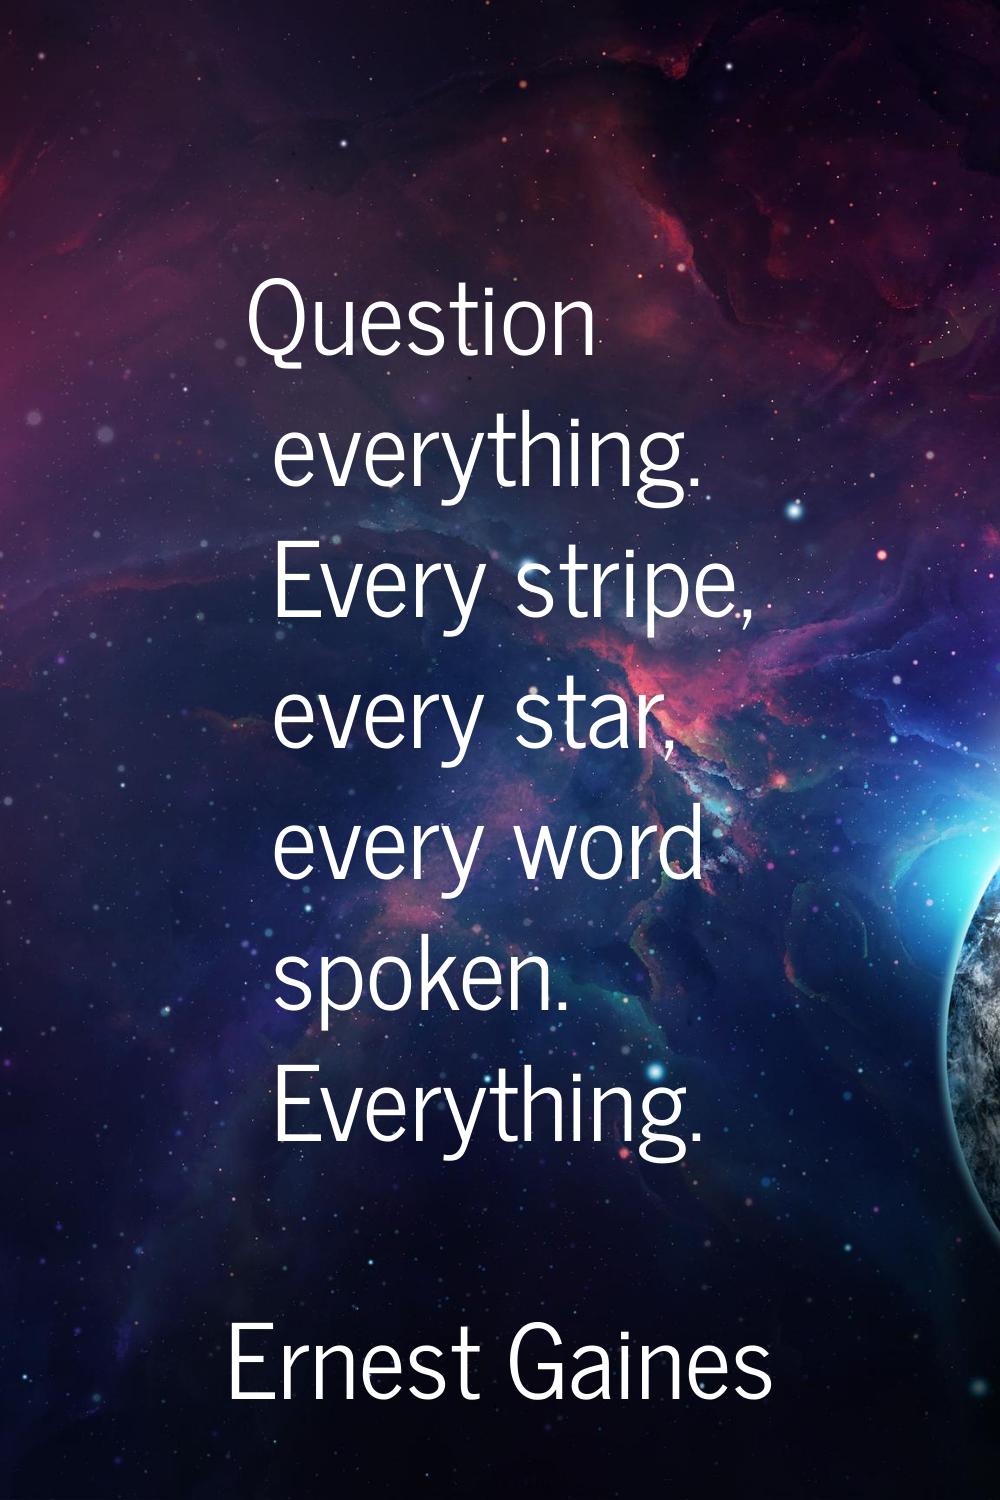 Question everything. Every stripe, every star, every word spoken. Everything.